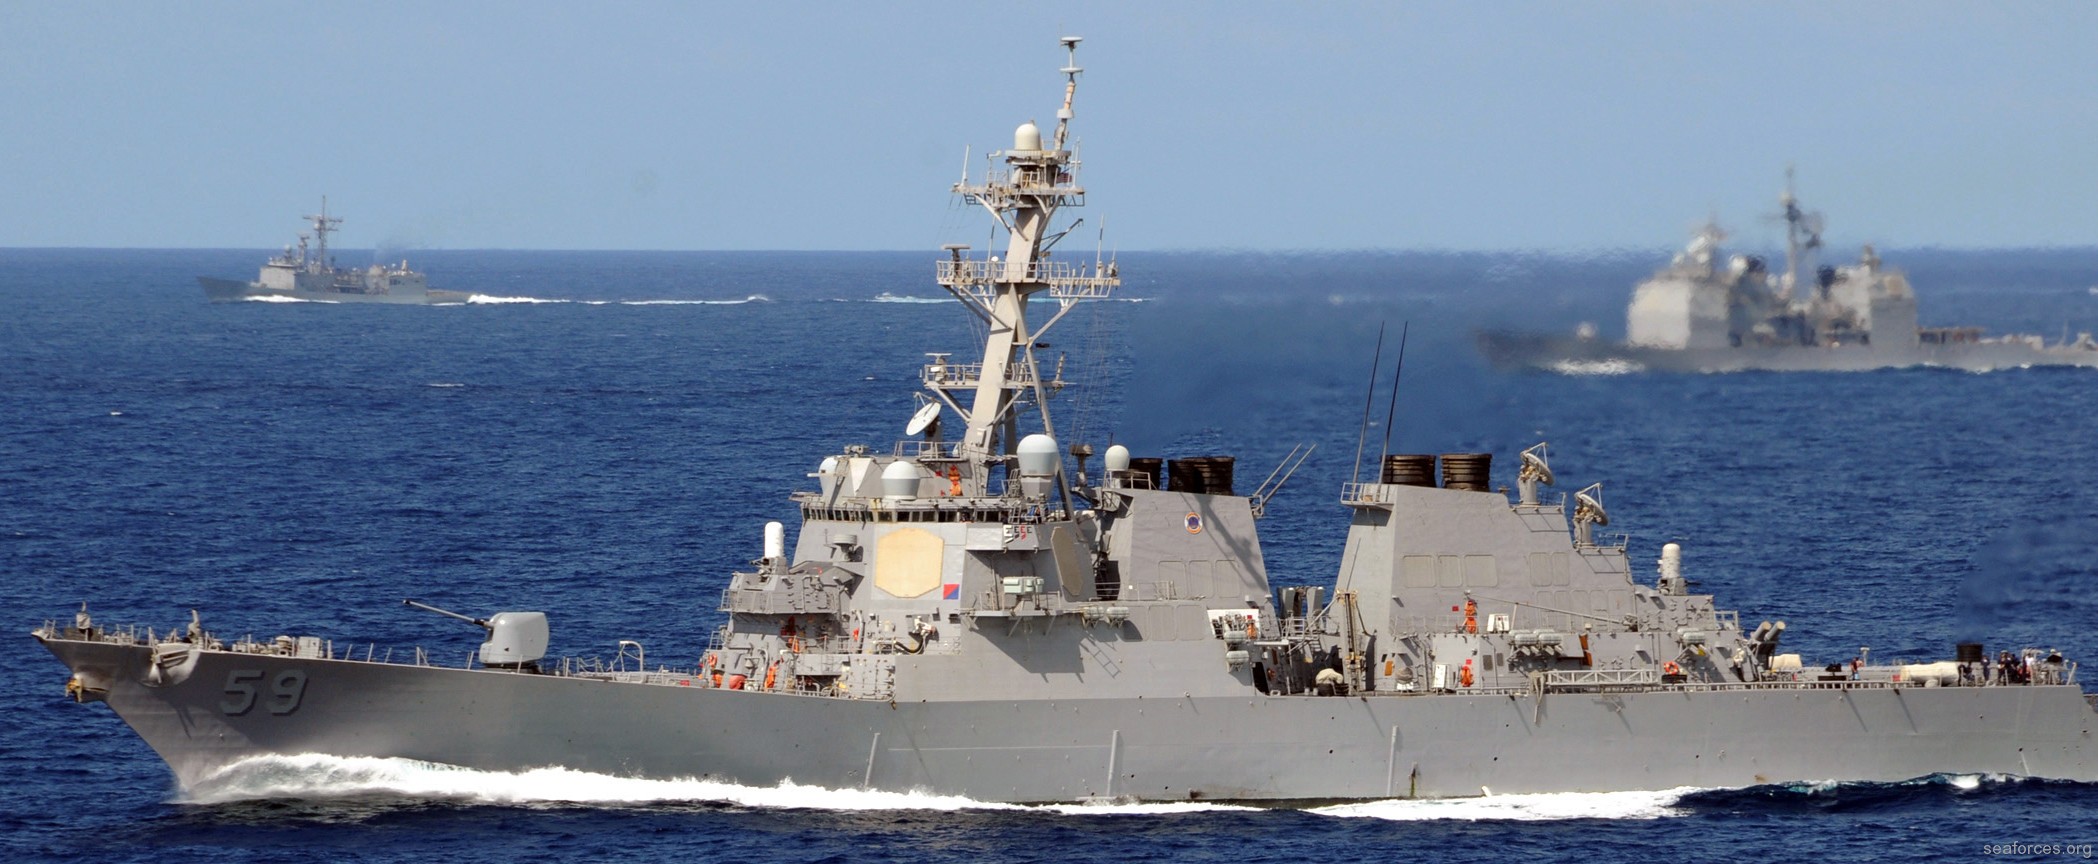 ddg-59 uss russell guided missile destroyer us navy 21